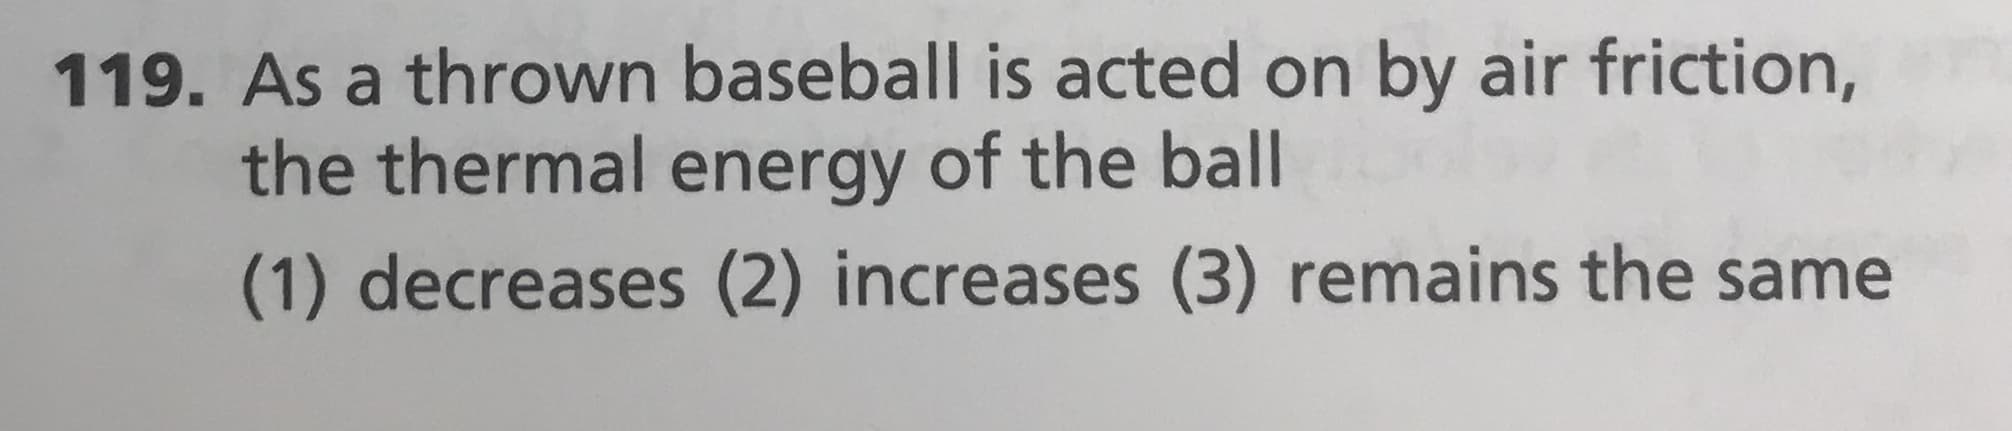 119. As a thrown baseball is acted on by air friction,
the thermal energy of the ball
(1) decreases (2) increases (3) remains the same
